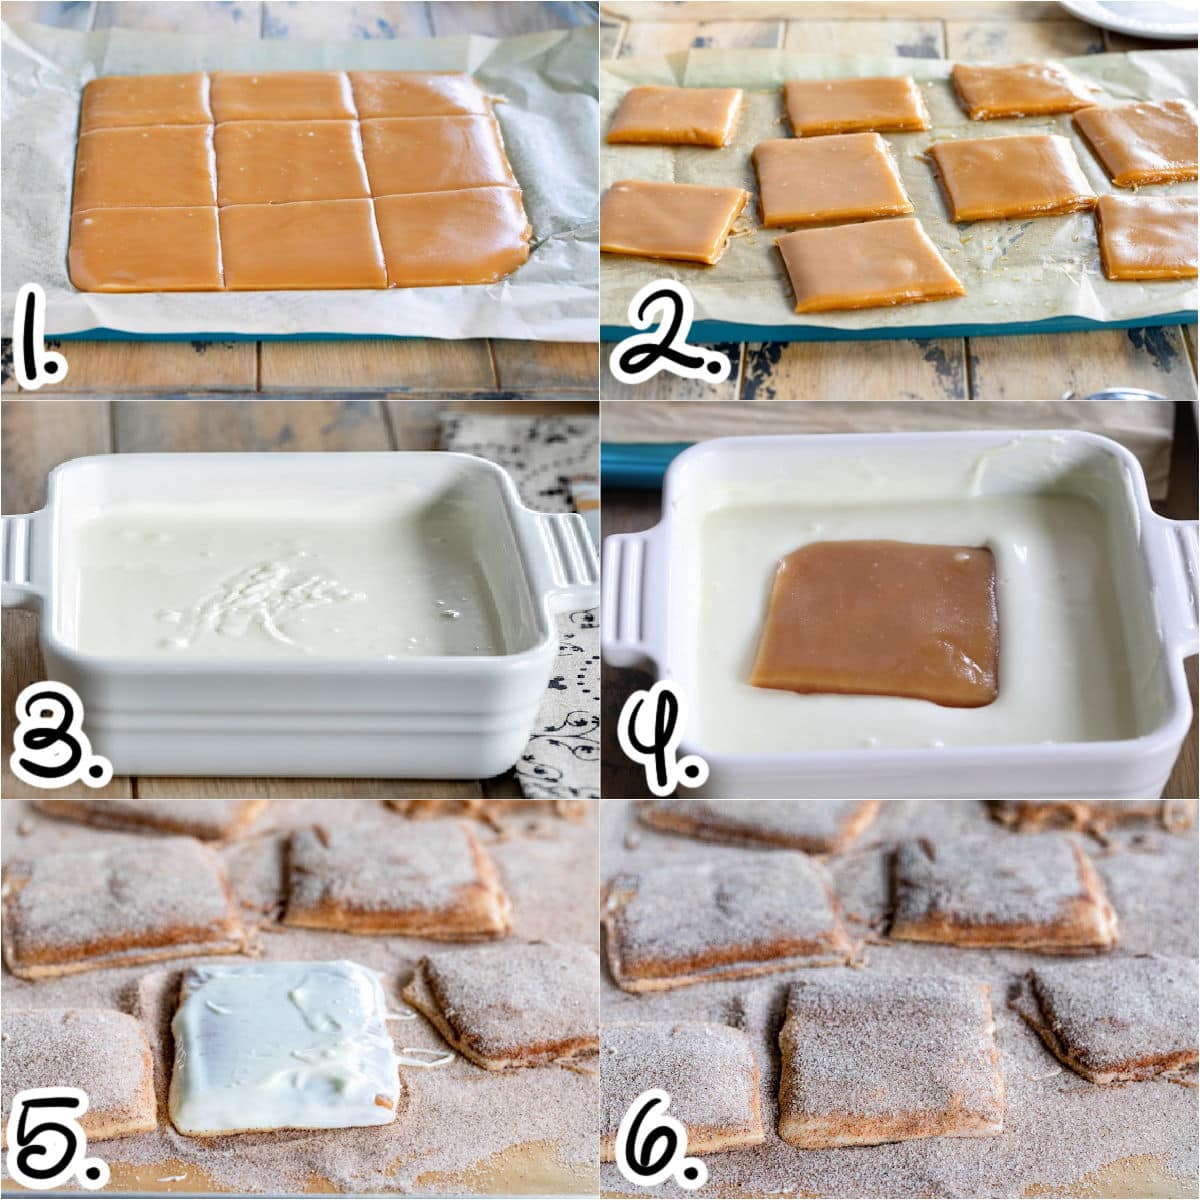 six image collage showing how to cut the toffee into squares and coat with white chocolate and cinnamon sugar.